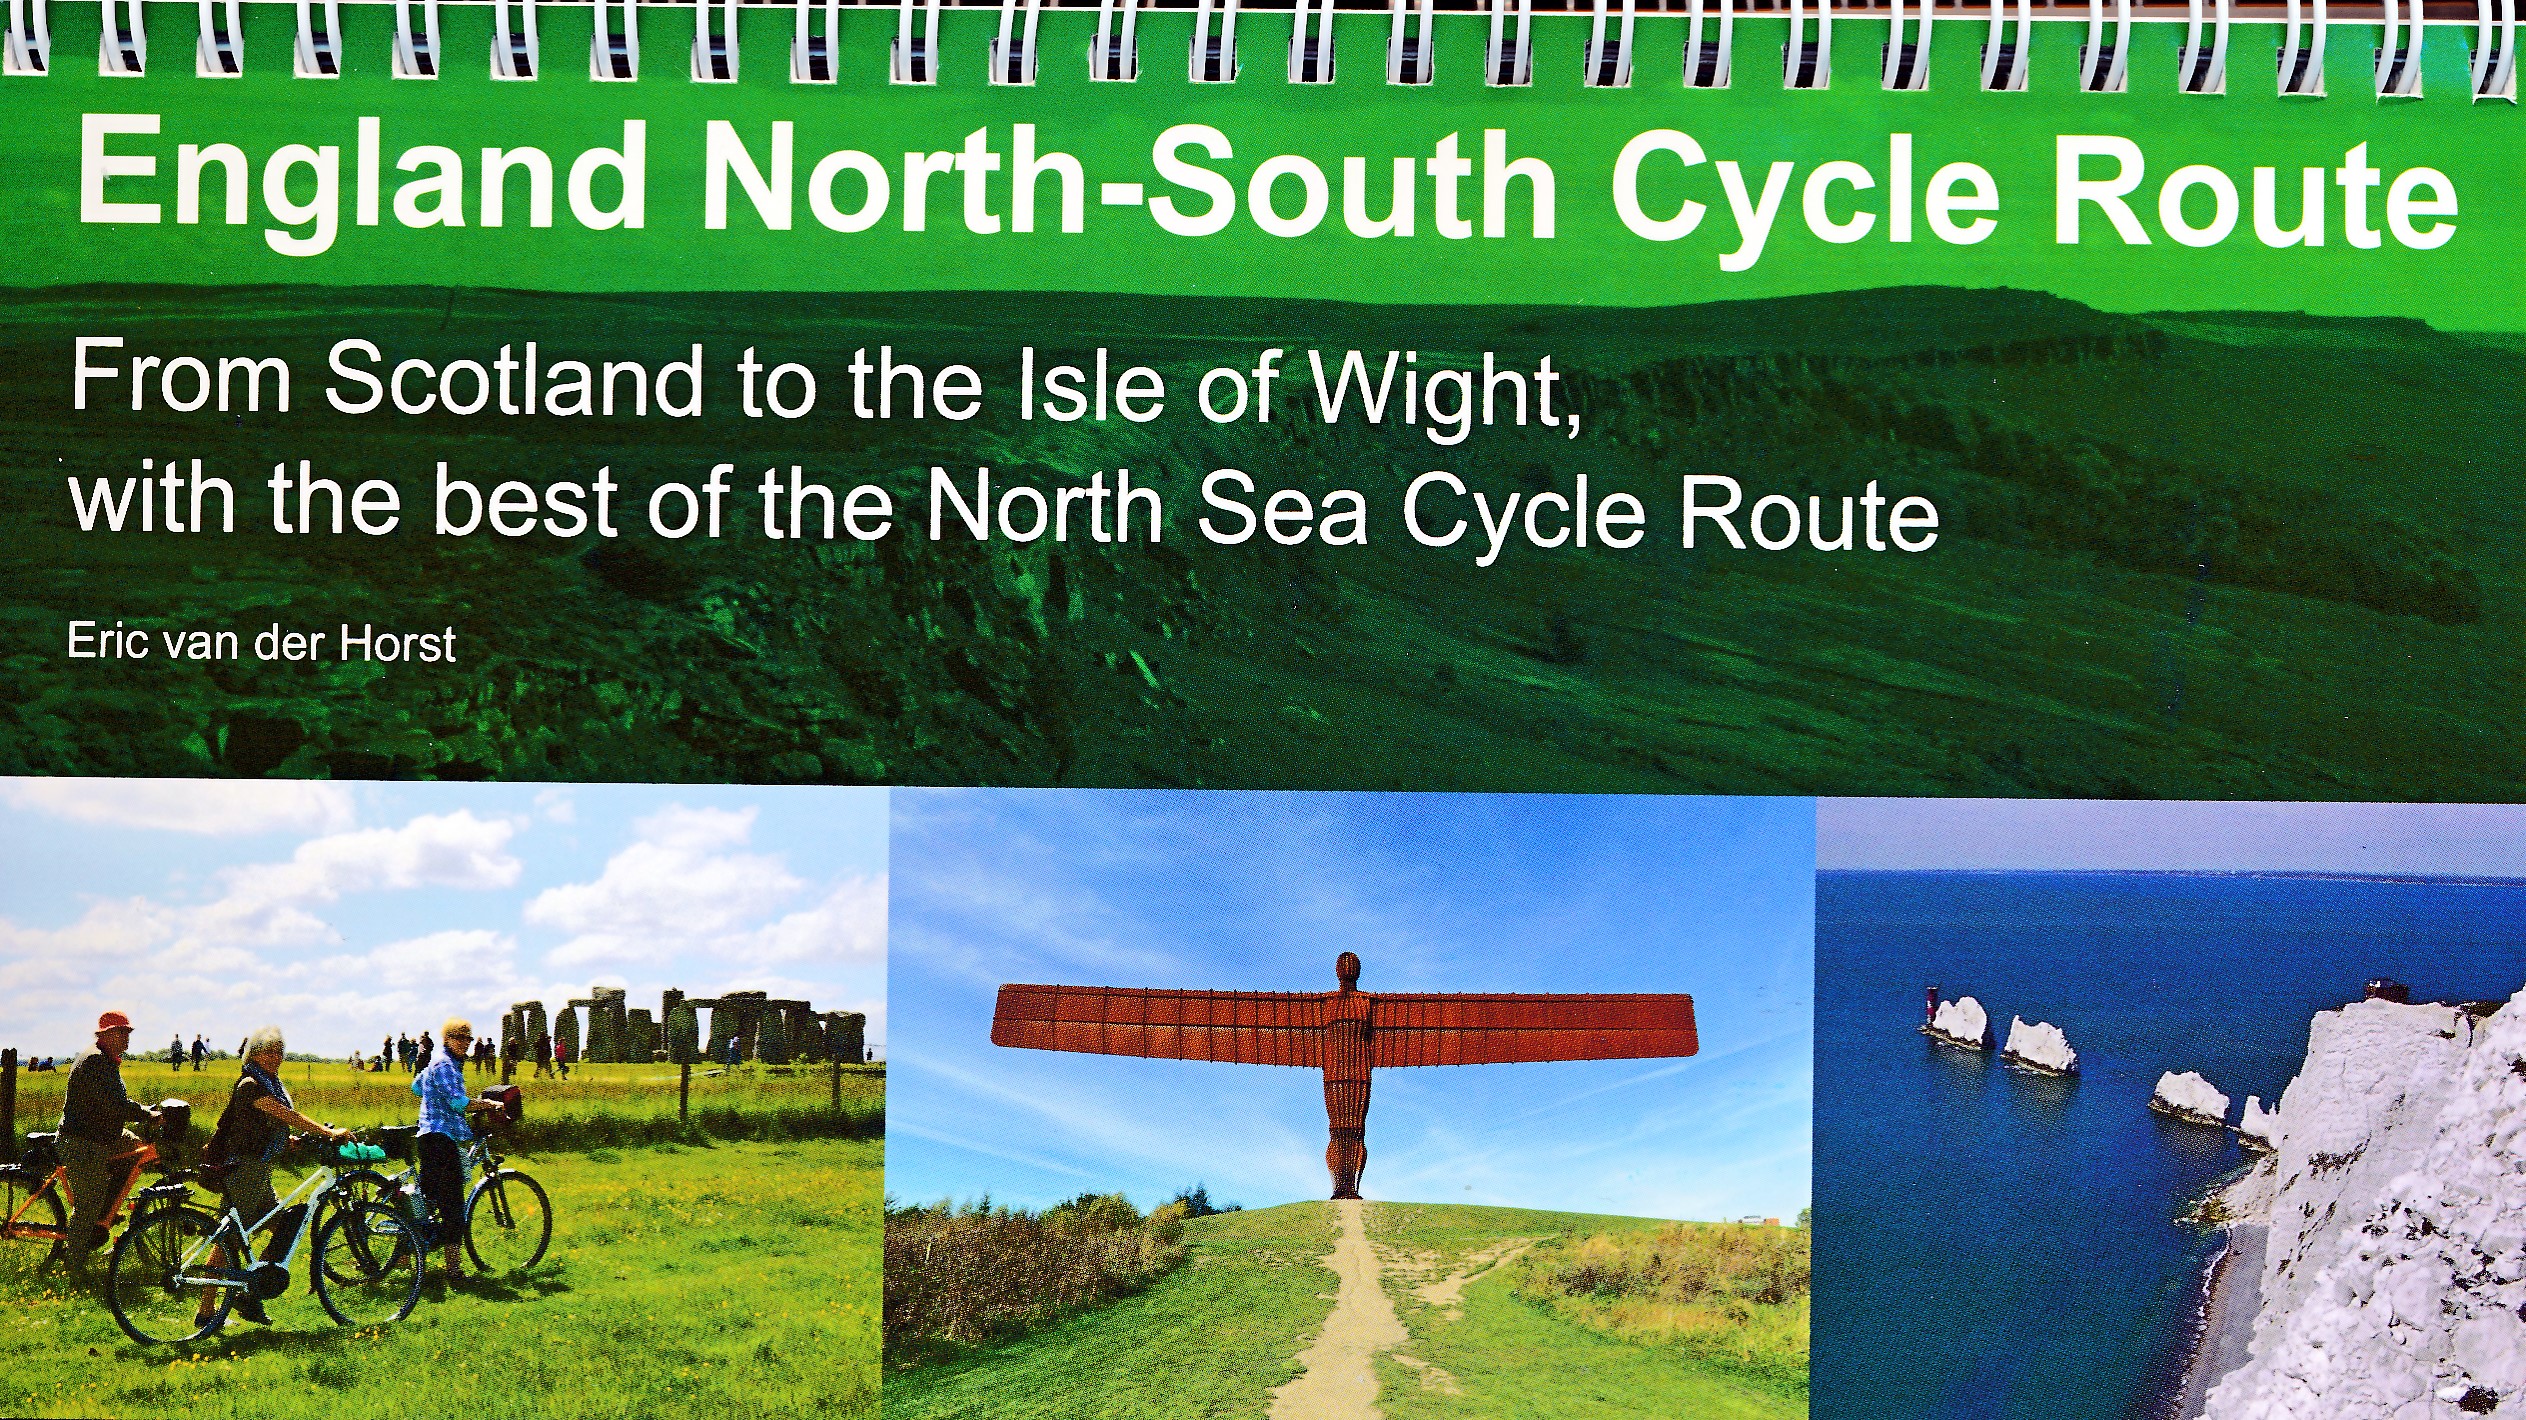 Online bestellen: Fietsgids England North - South Cycle Route | EOS Cycling Holidays Ltd